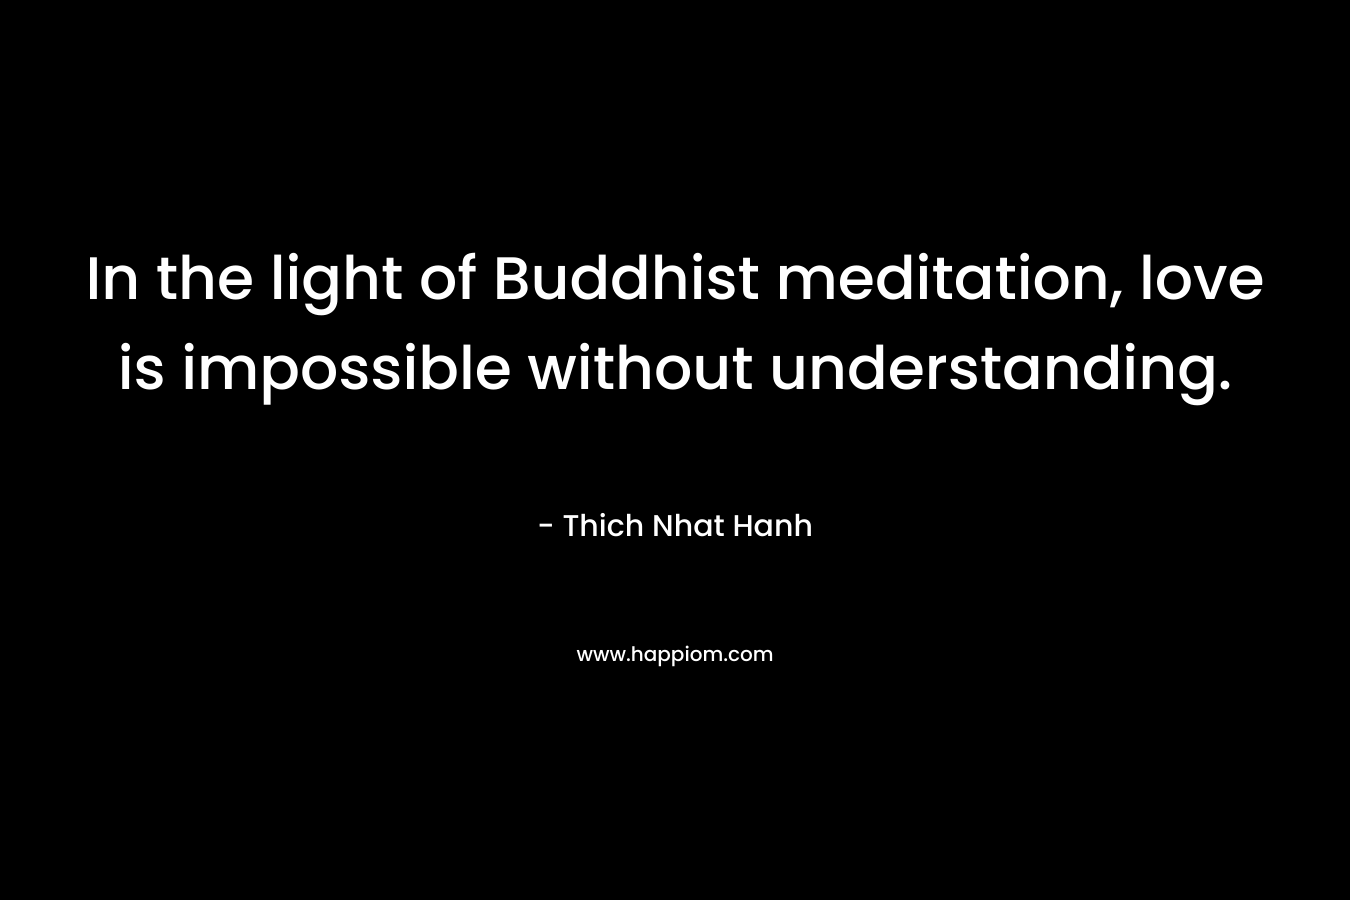 In the light of Buddhist meditation, love is impossible without understanding.